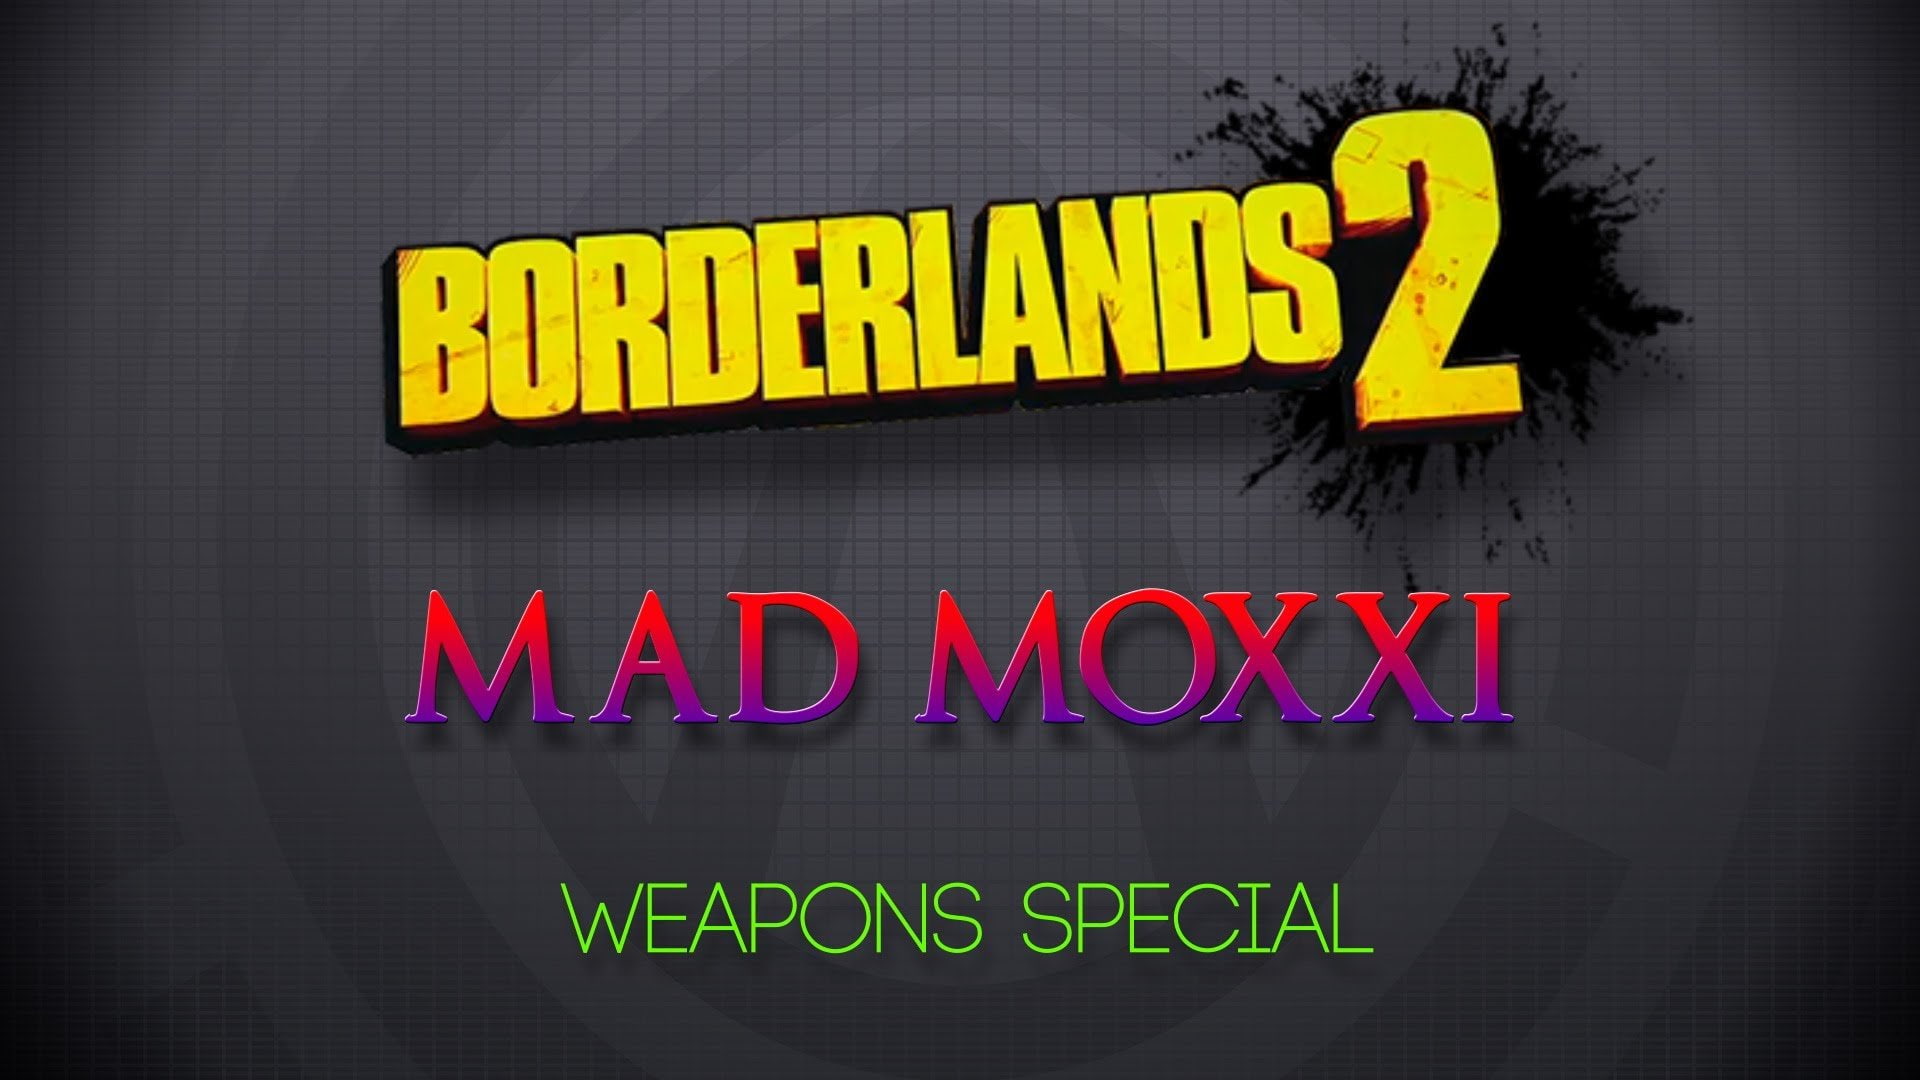 action, borderlands, fantasy, mad, moxxi, rpg, sci fi, shooter